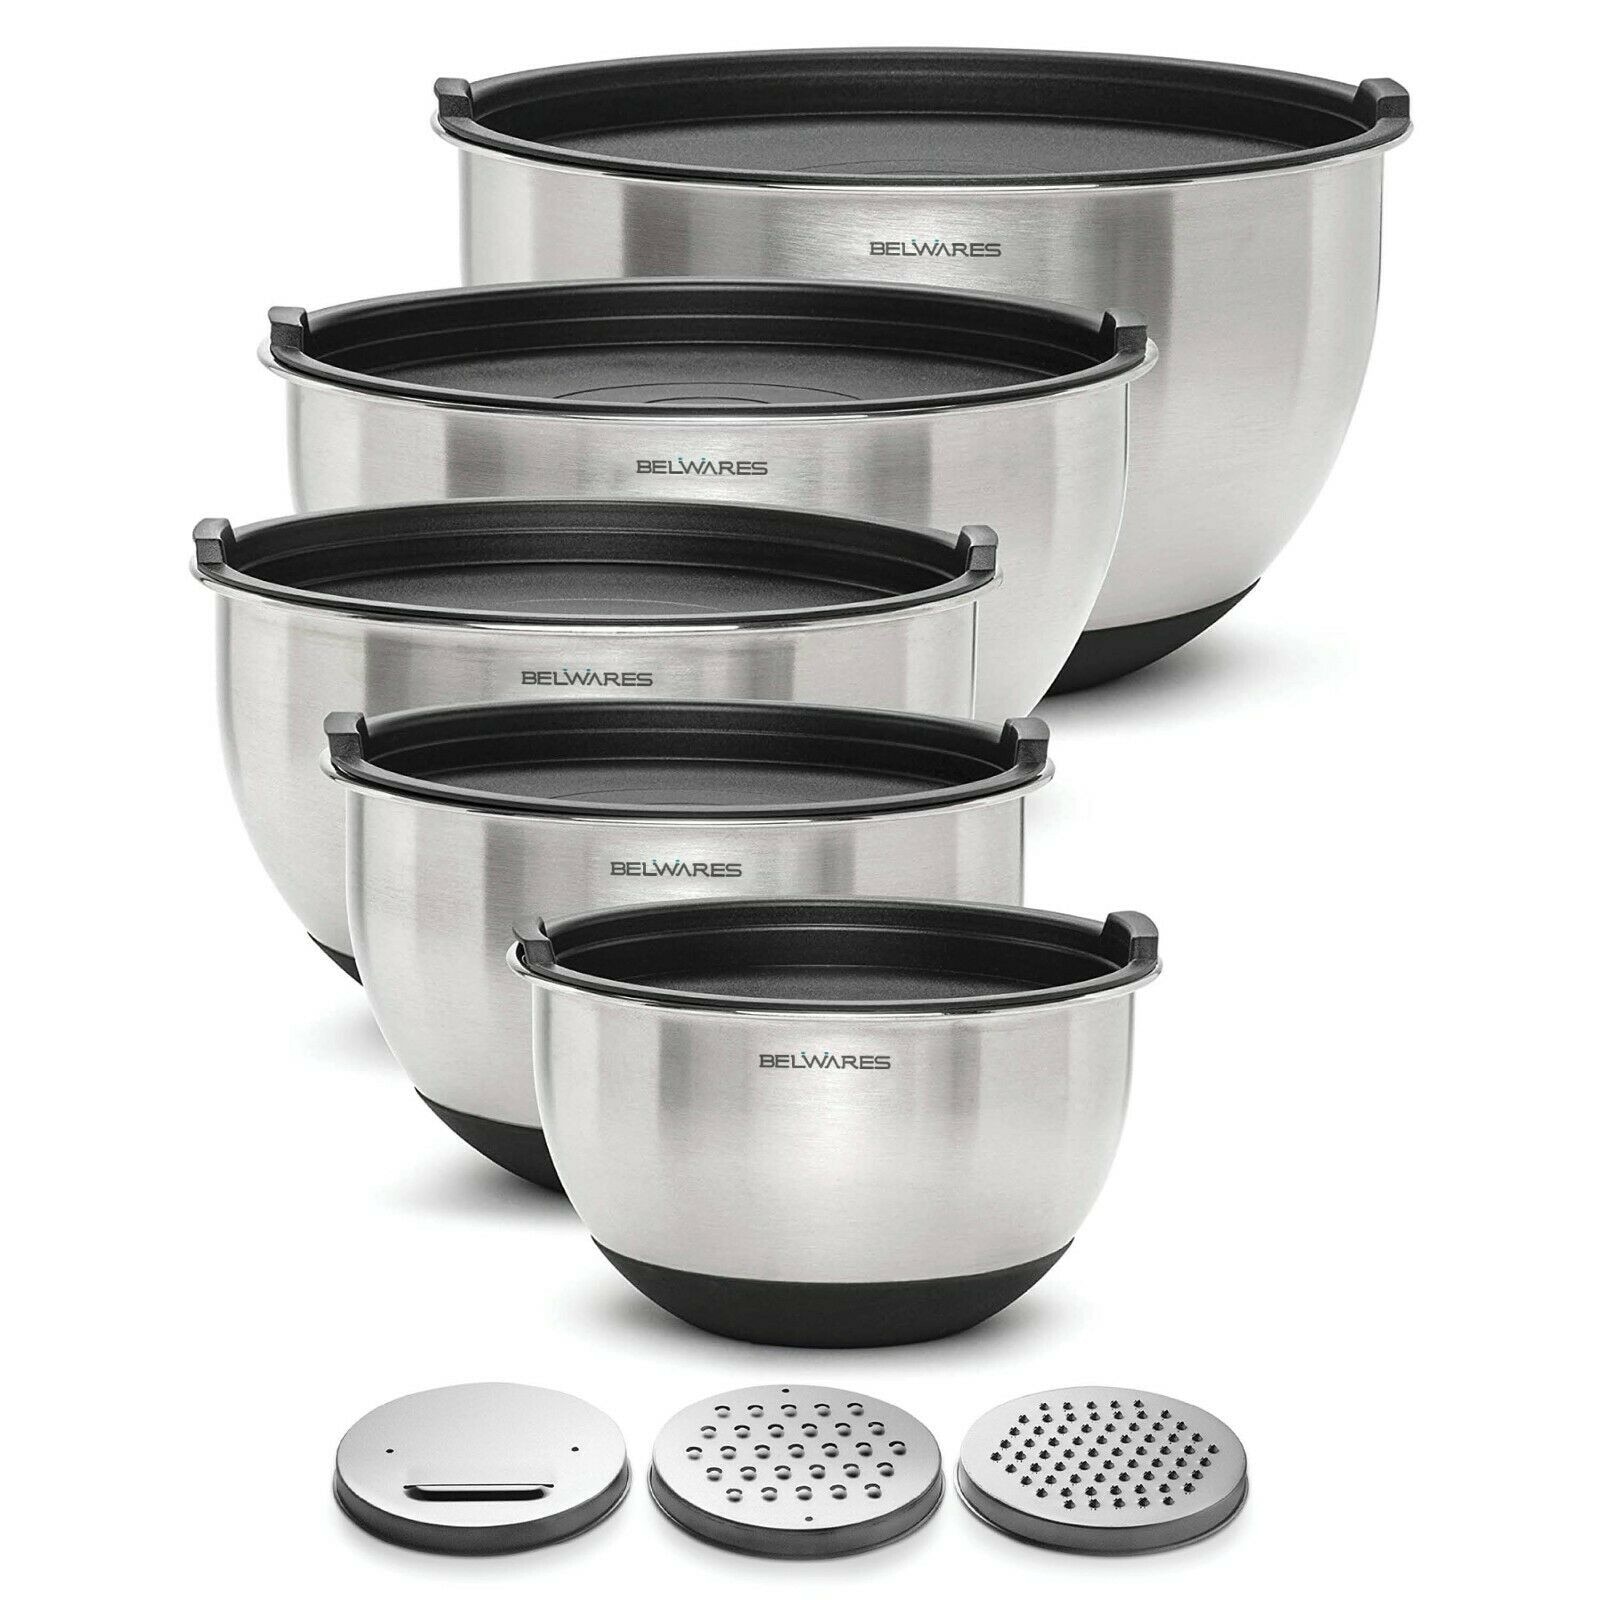 https://ak1.ostkcdn.com/images/products/is/images/direct/ecea05bdbd57819e808a8079dde9d5fa481e2d05/Belwares-Set-of-5-Stainless-Steel-Mixing-Bowls-with-Airtight-Lids-and-Graters.jpg